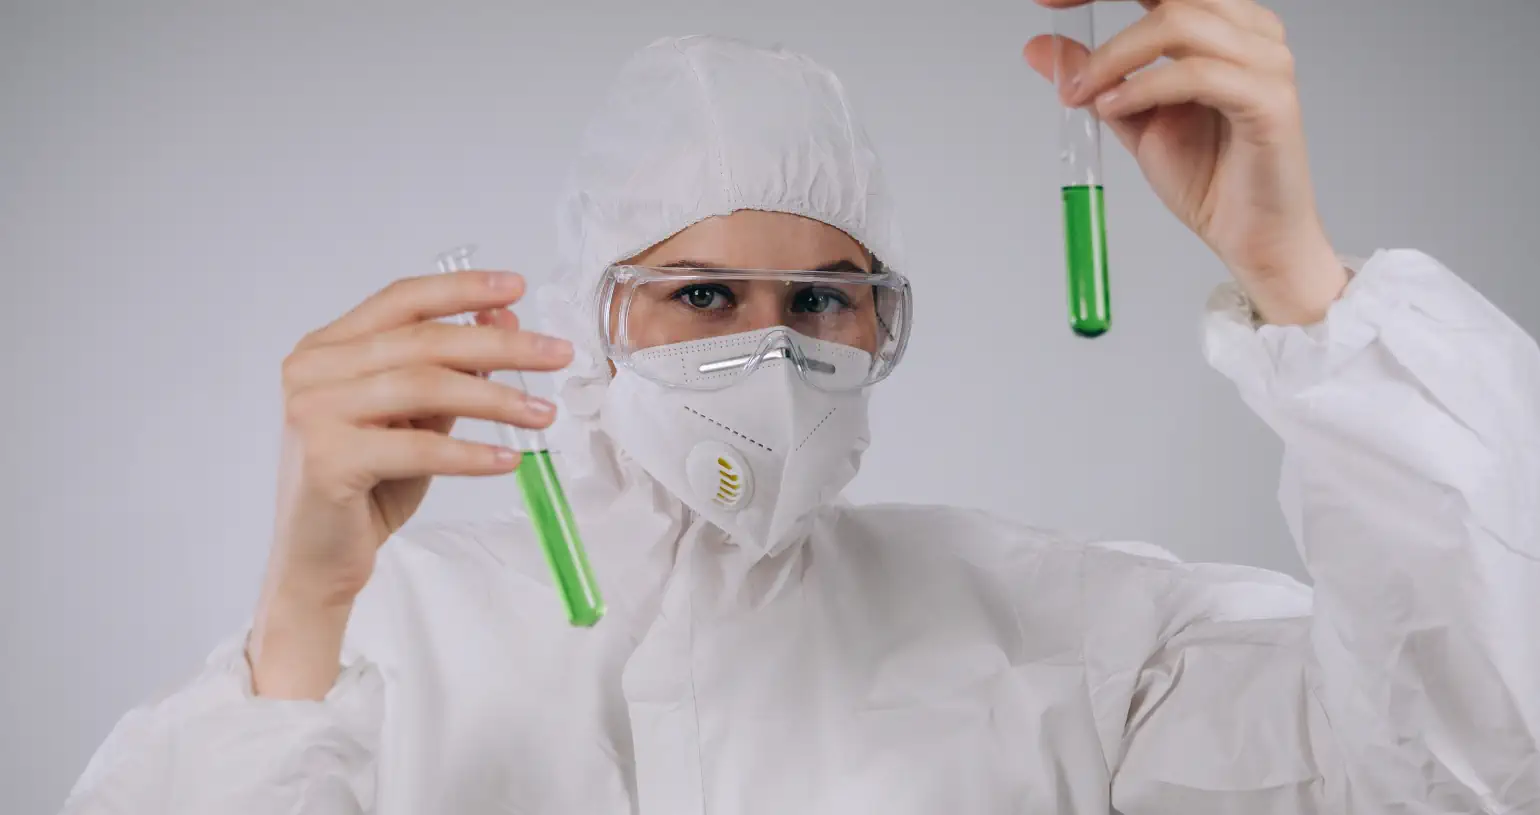 A chemist in complete PPE holds two test tubes holding green liquid.